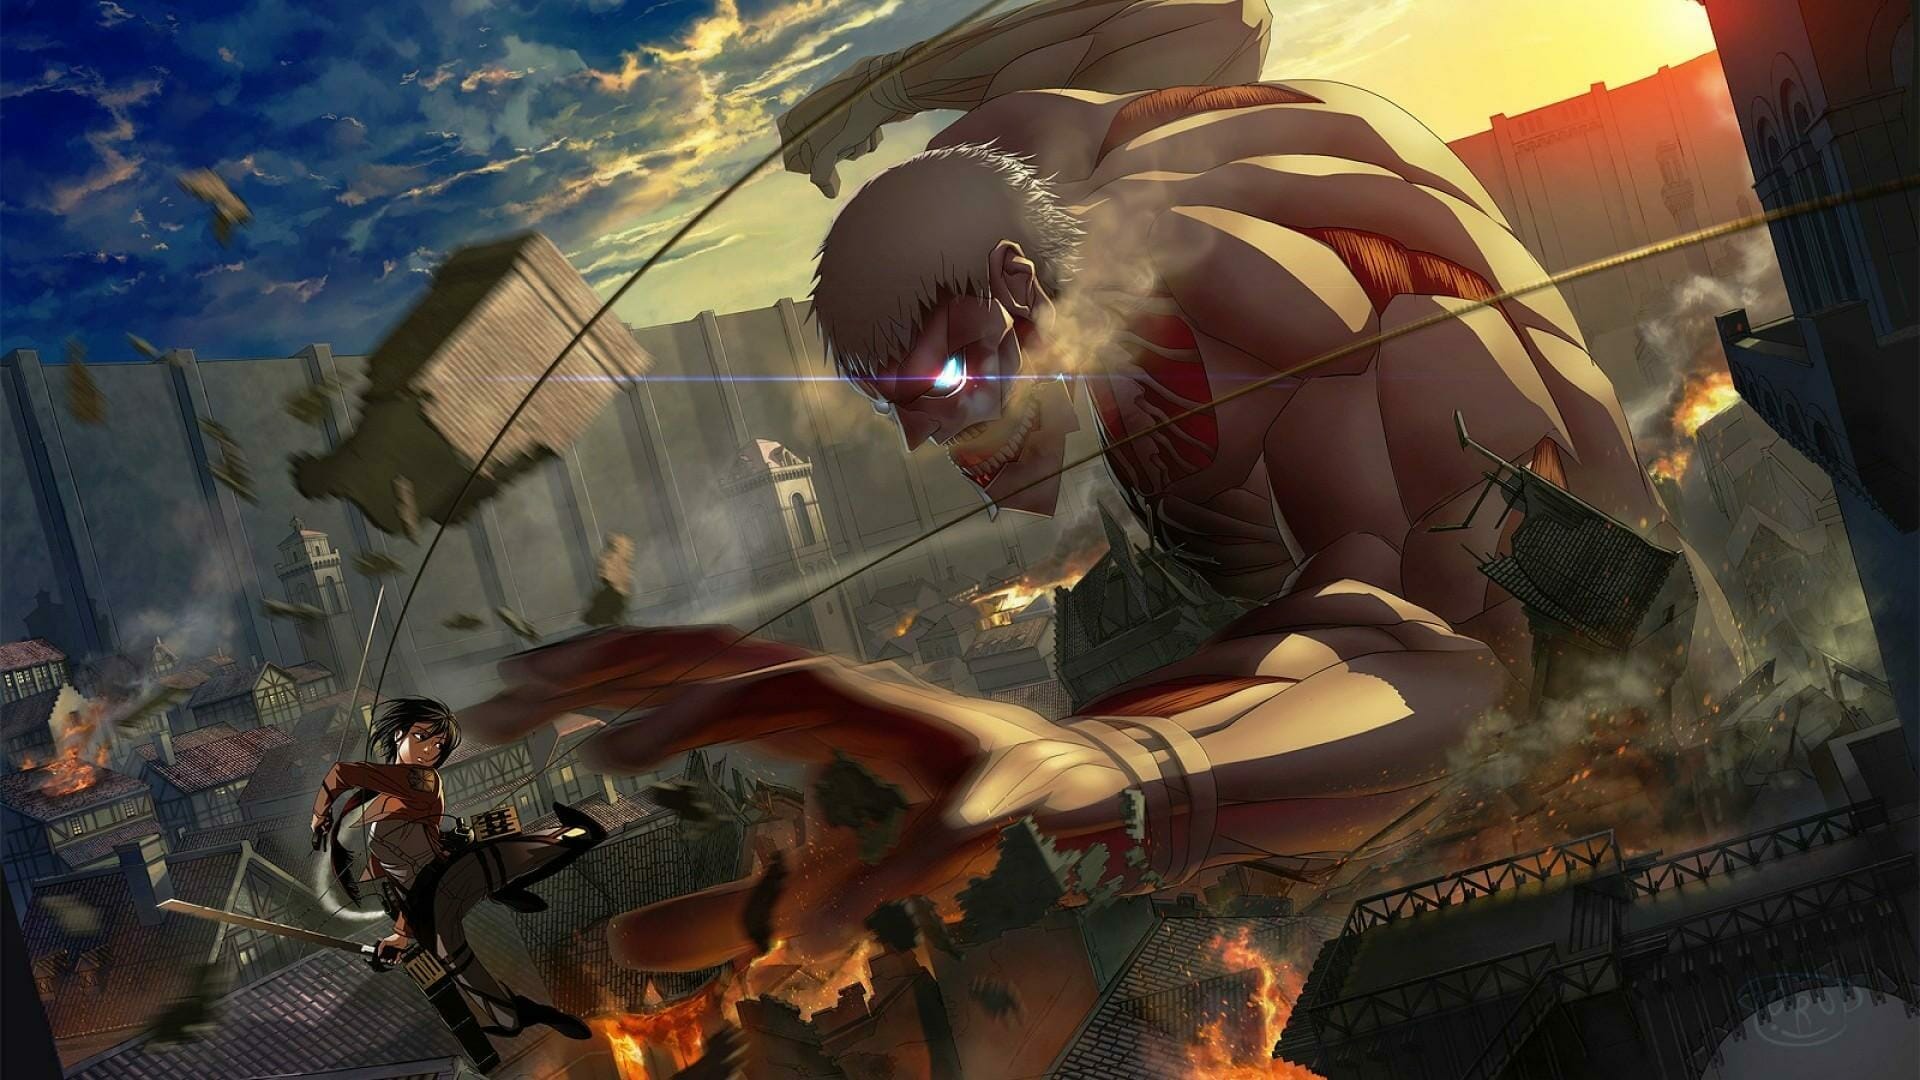 attack on titans season 4 wallpapers Wallpapers